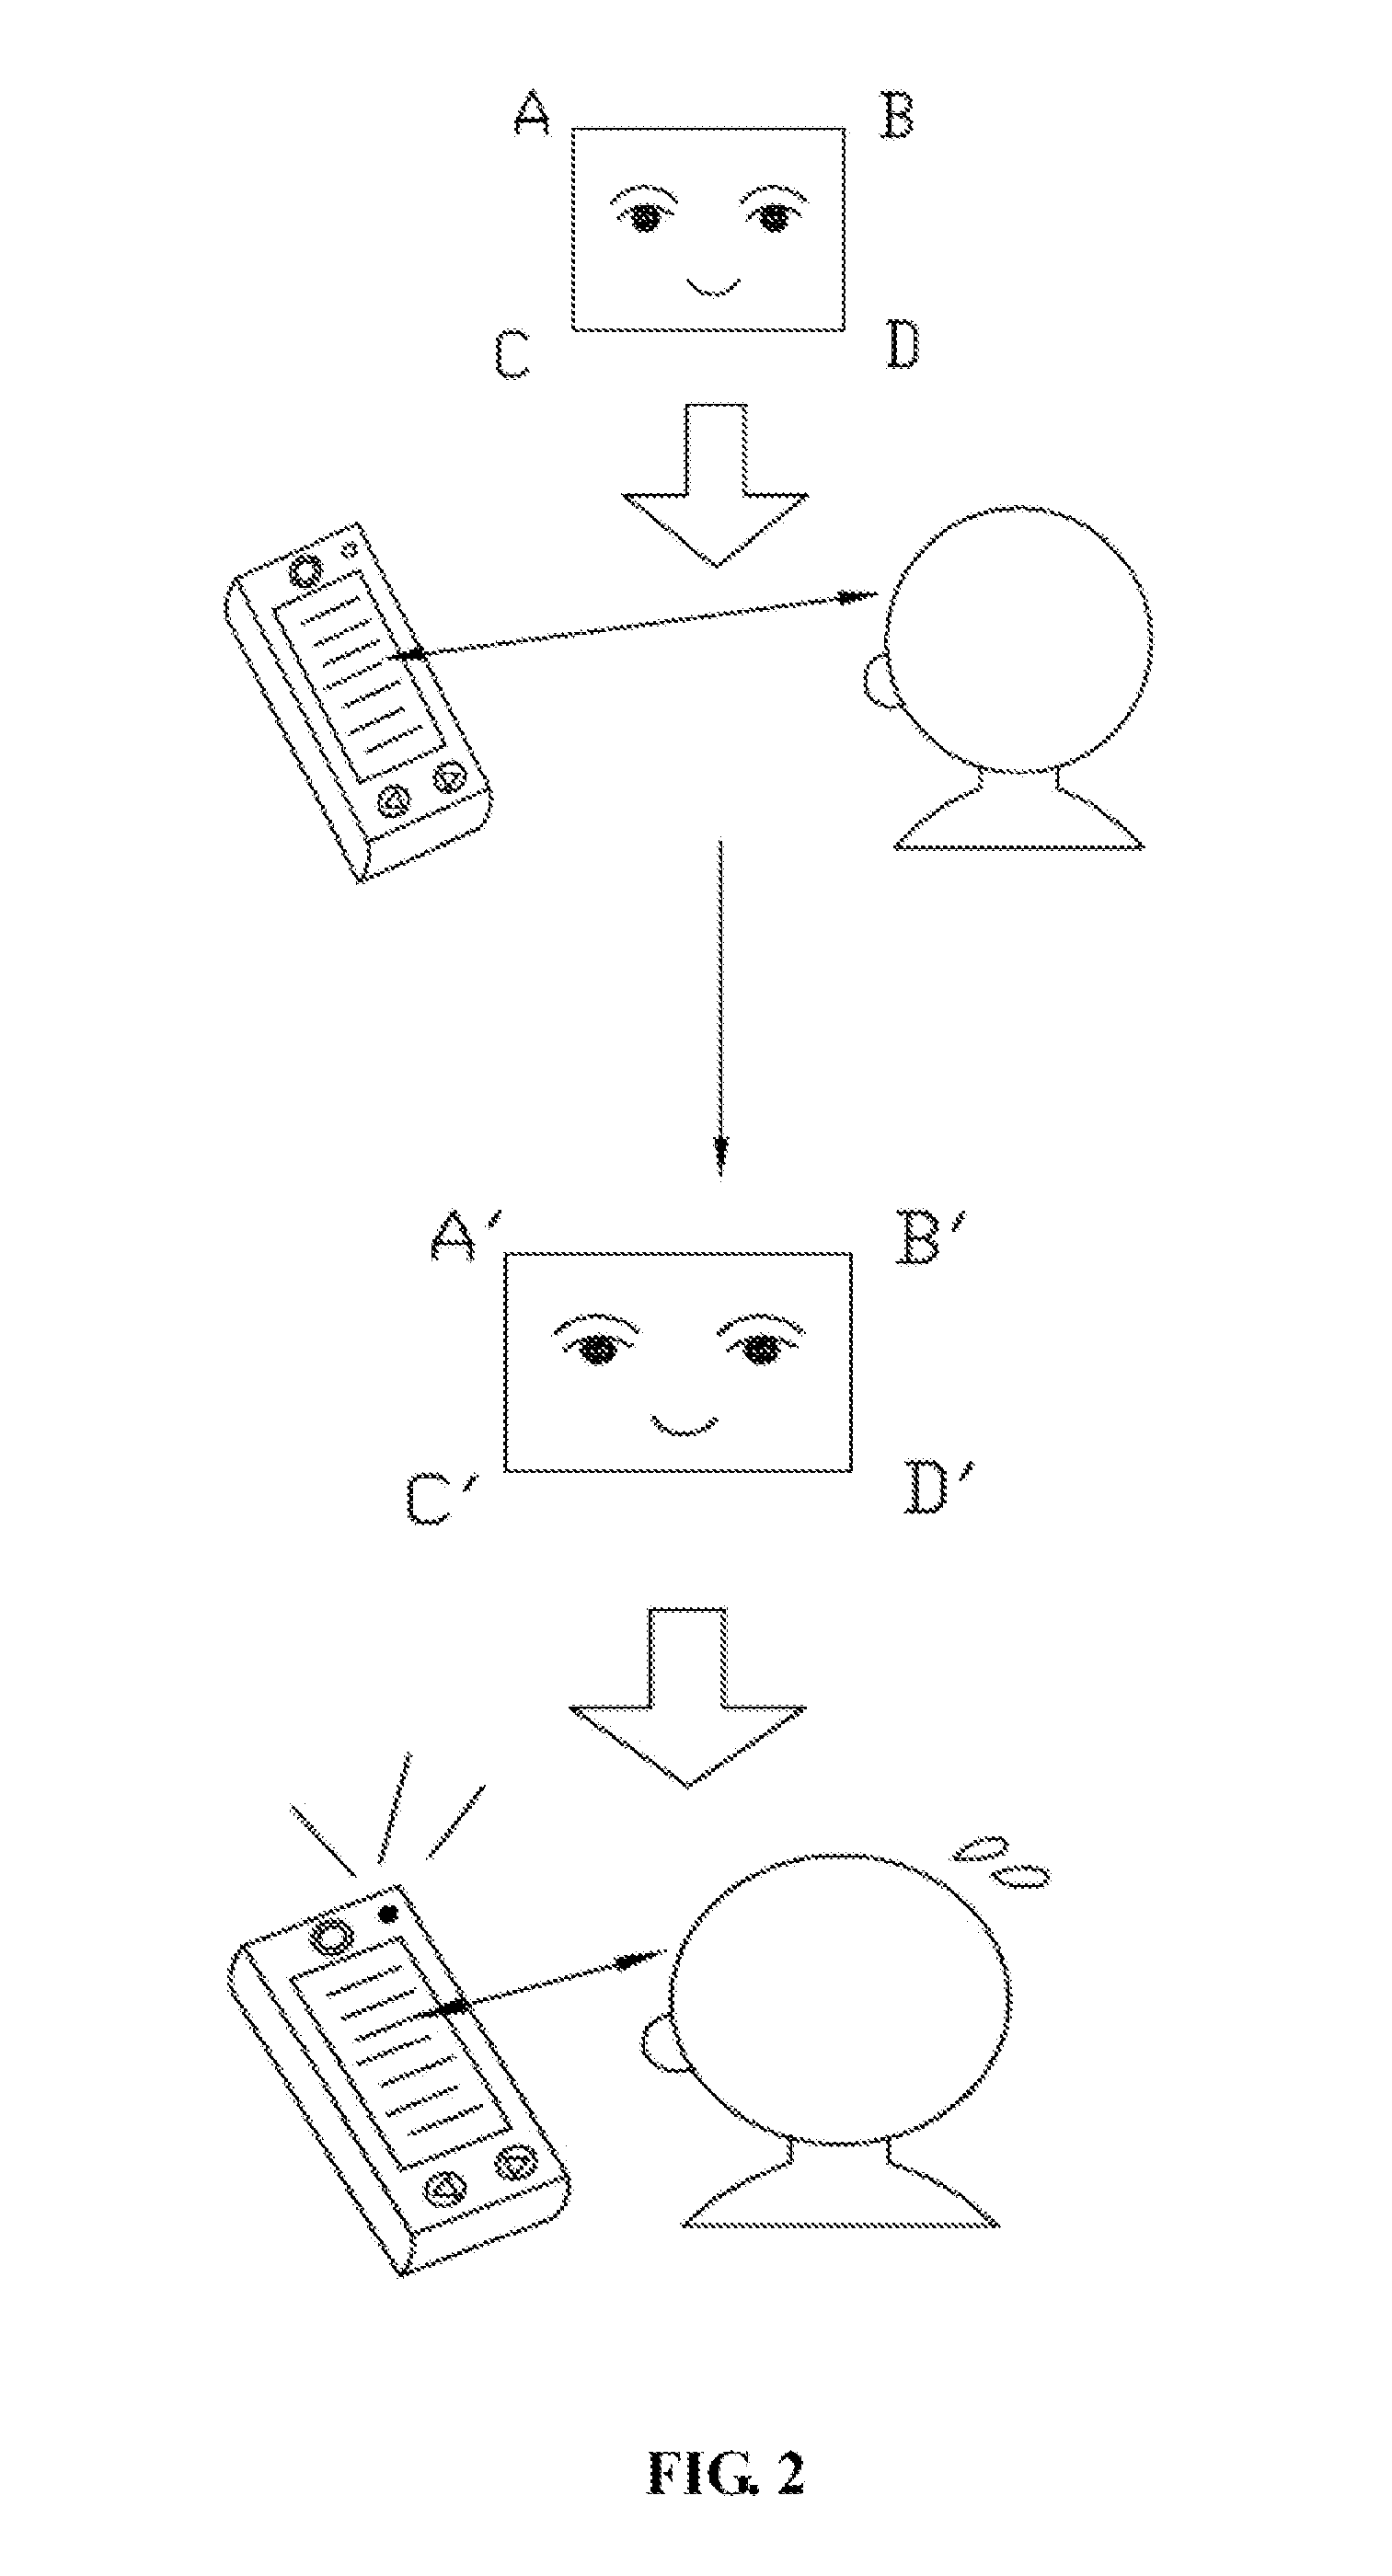 Electronic device and method for monitoring user state